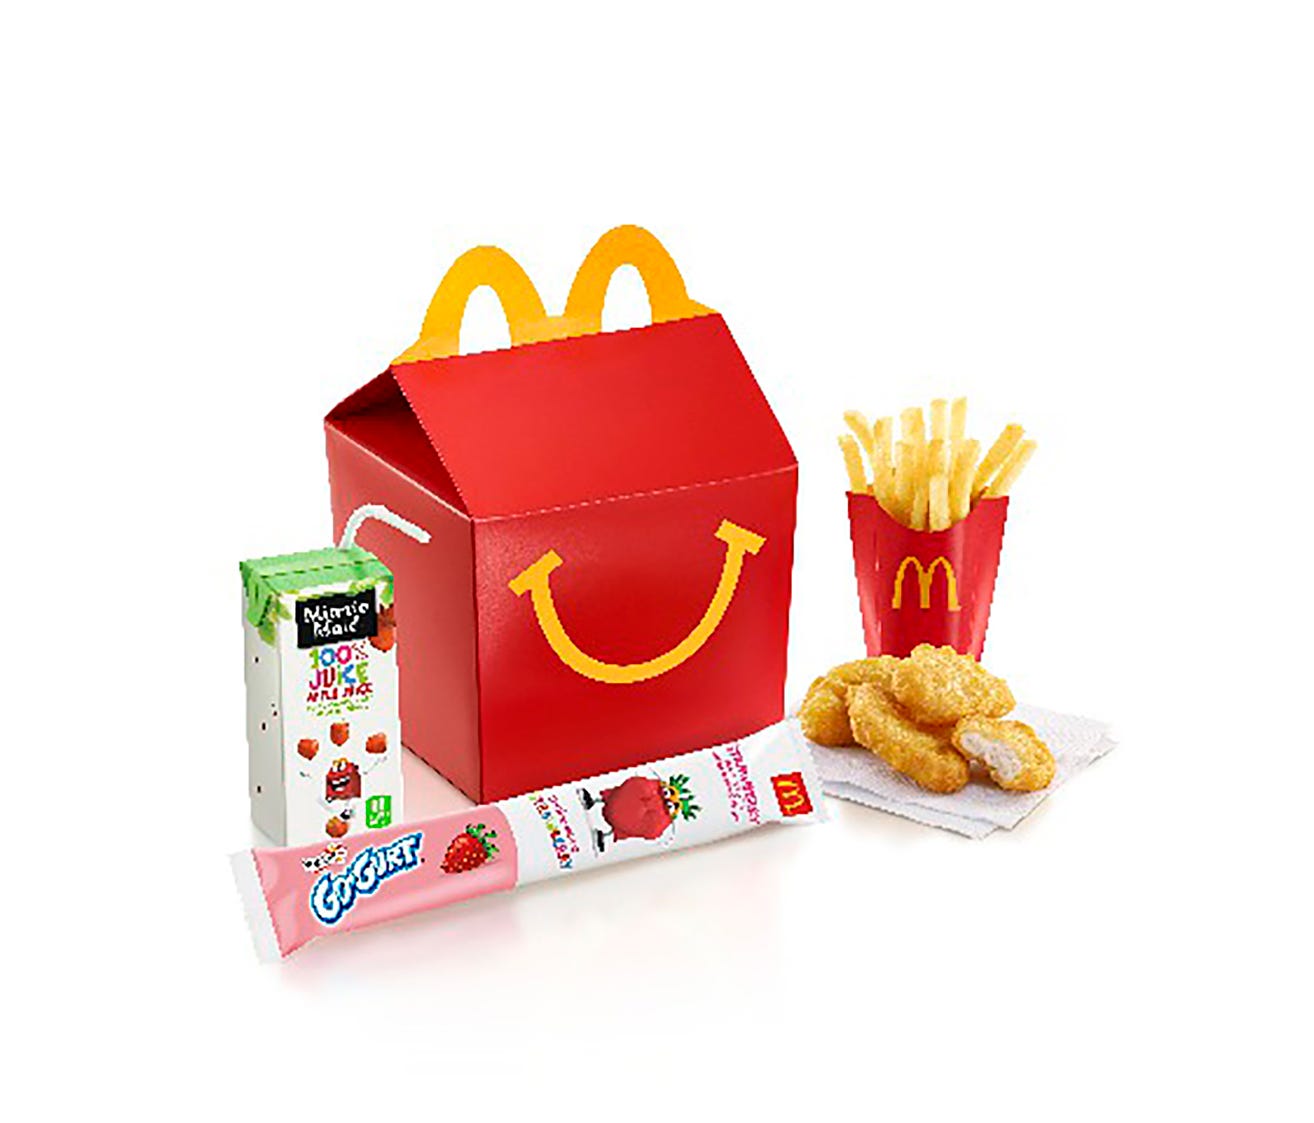 McDonald's will replace its current Happy Meal apple juice box with an organic, less sugary one in November.